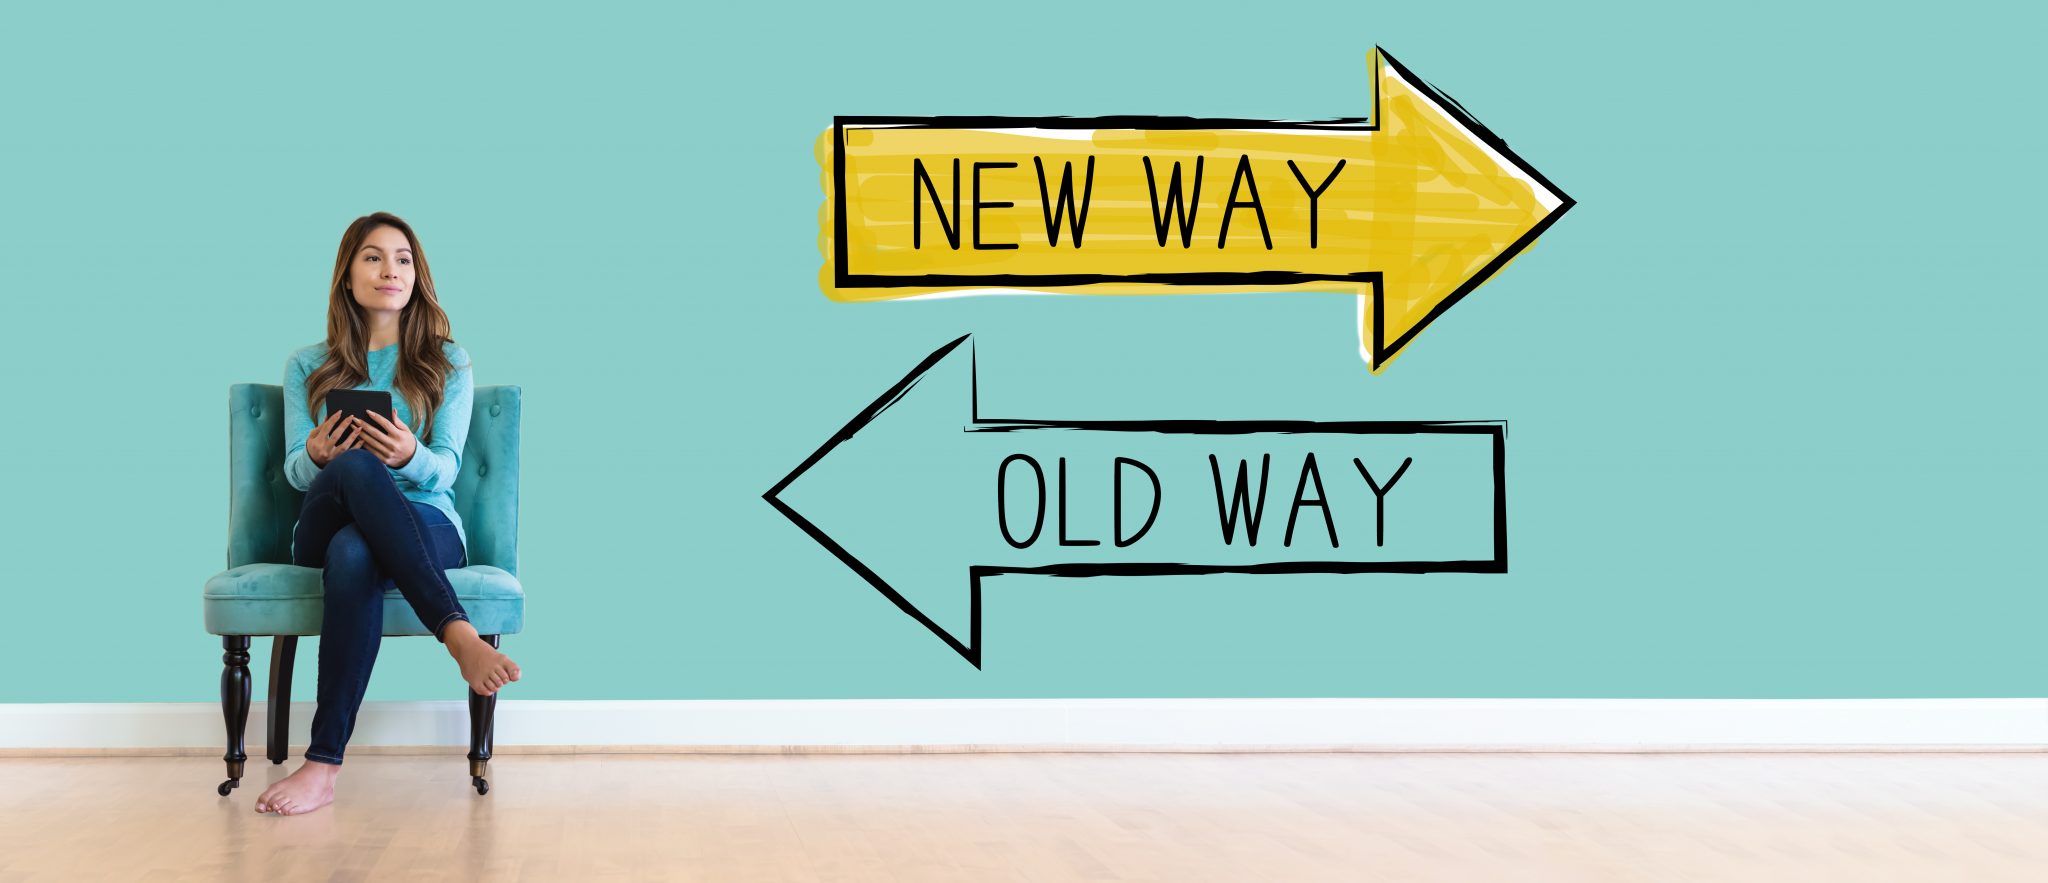 Make way for the new. Old way New way. Картинка old way New way.